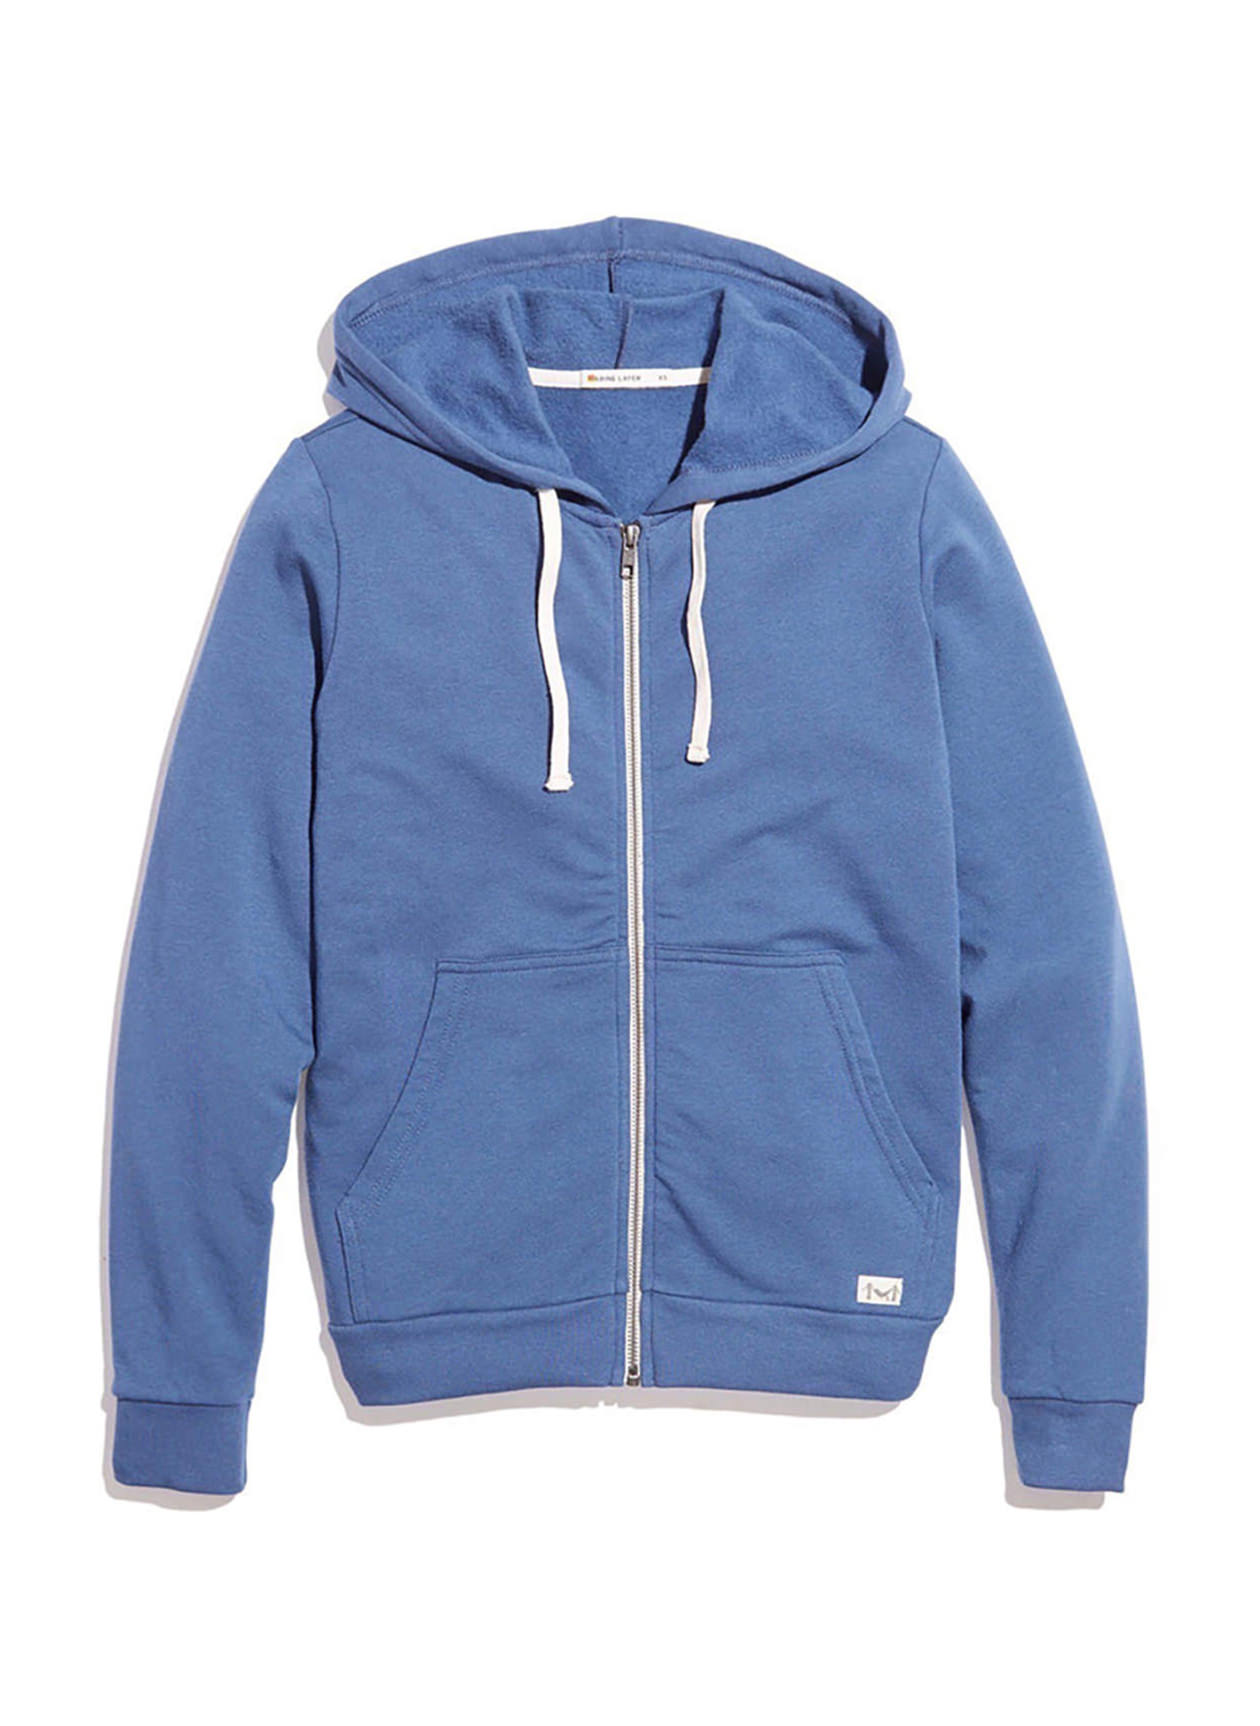 Logo Hoodies | Embroidered Marine Layer Women's Faded Navy Afternoon ...